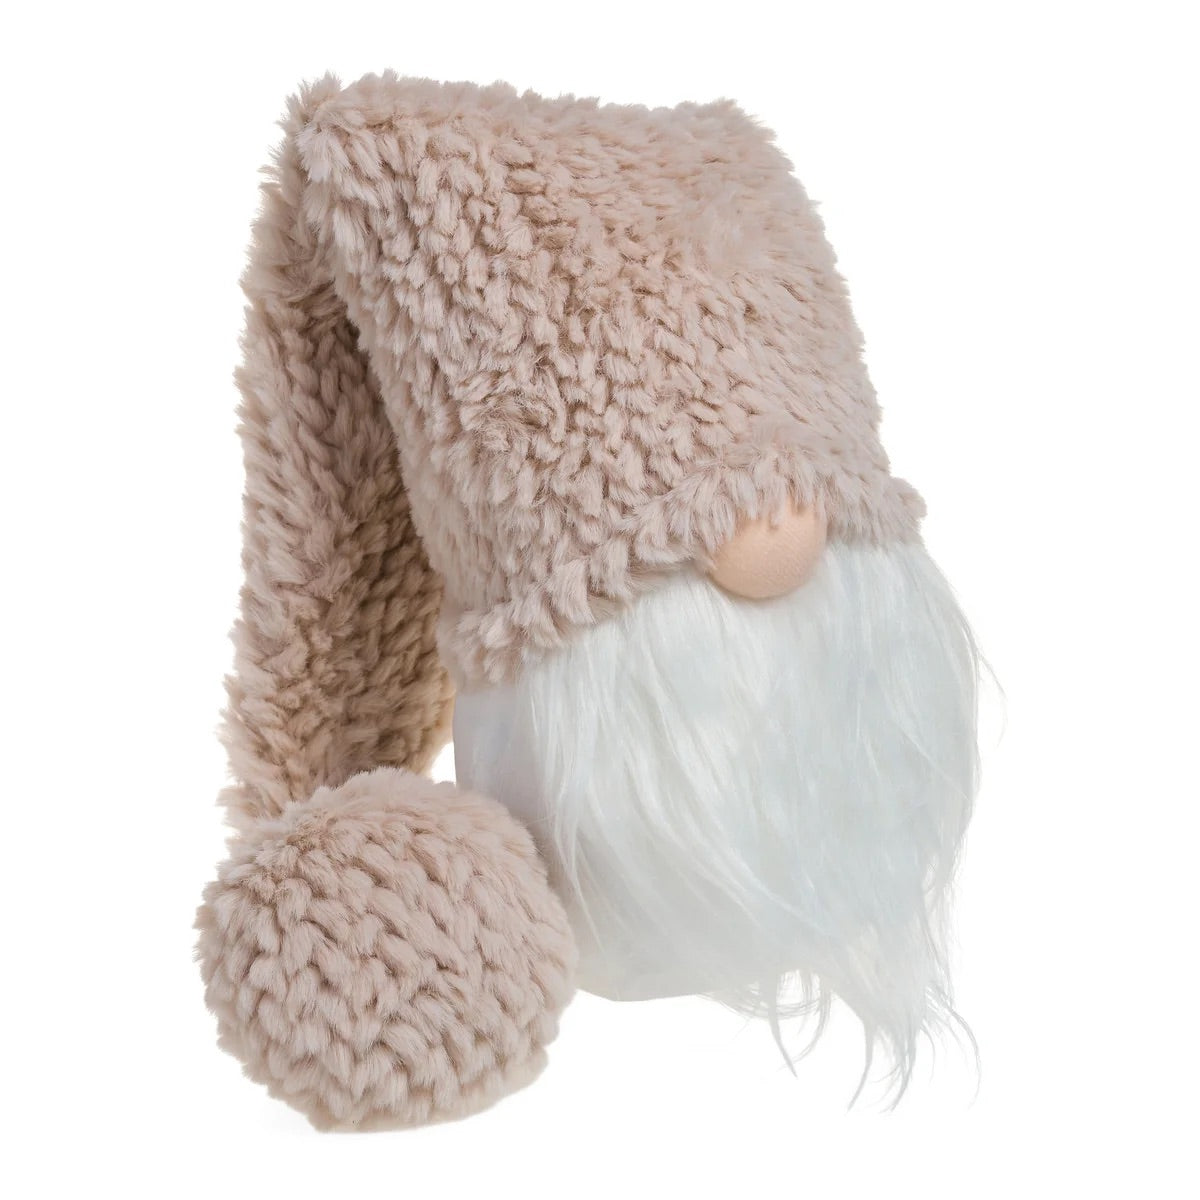 GNOME, HEAD LG W/KNITTED HAT - BEIGE